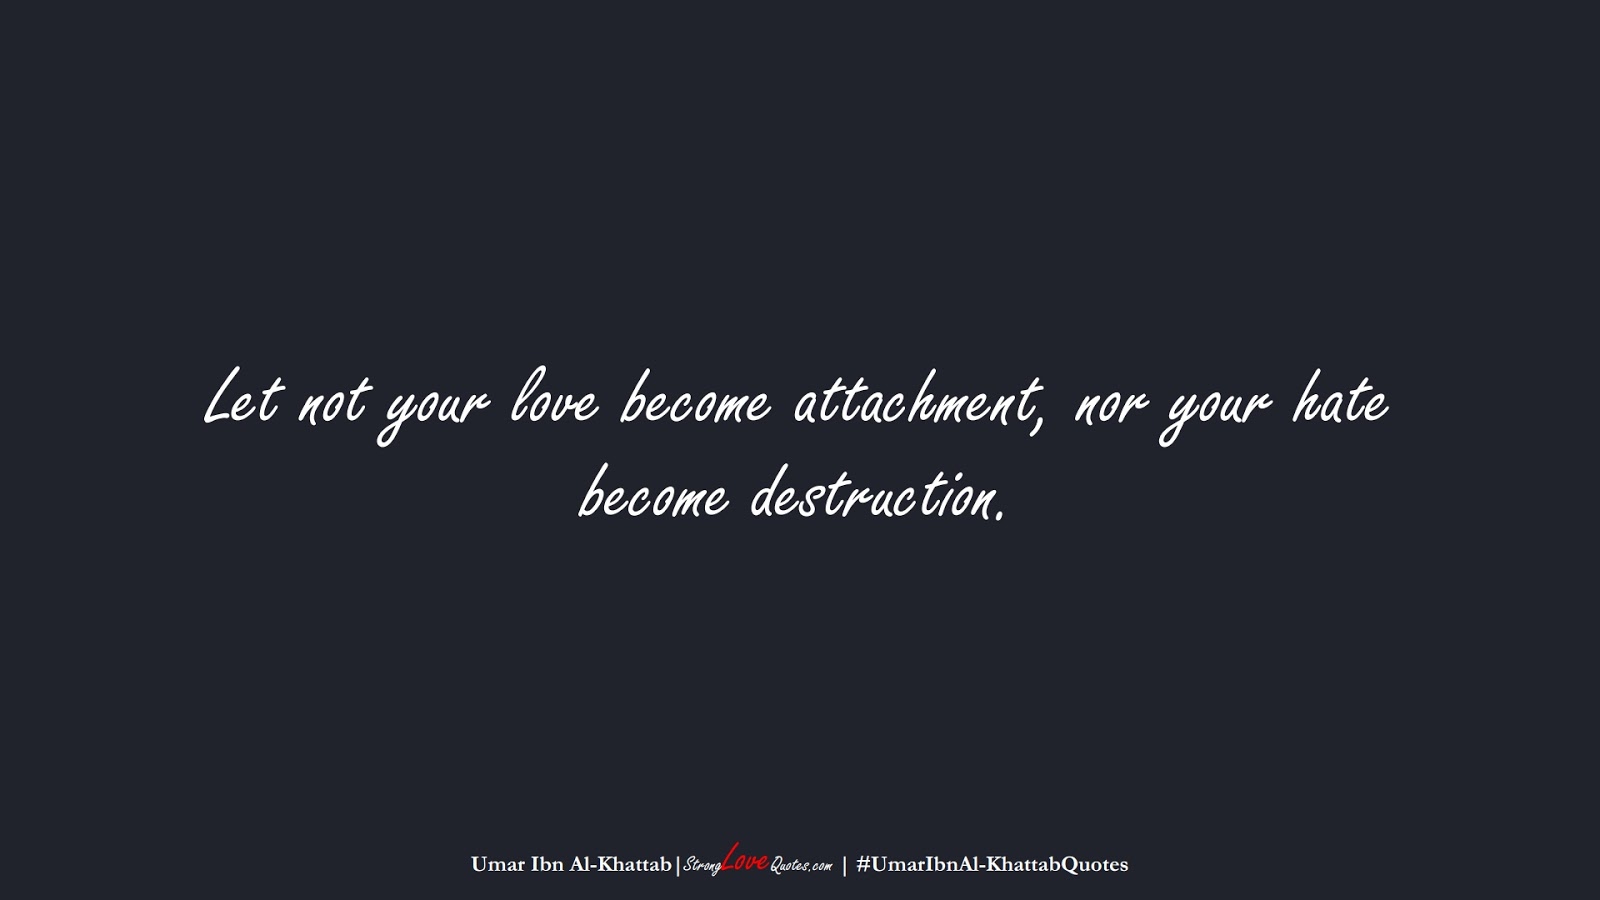 Let not your love become attachment, nor your hate become destruction. (Umar Ibn Al-Khattab);  #UmarIbnAl-KhattabQuotes